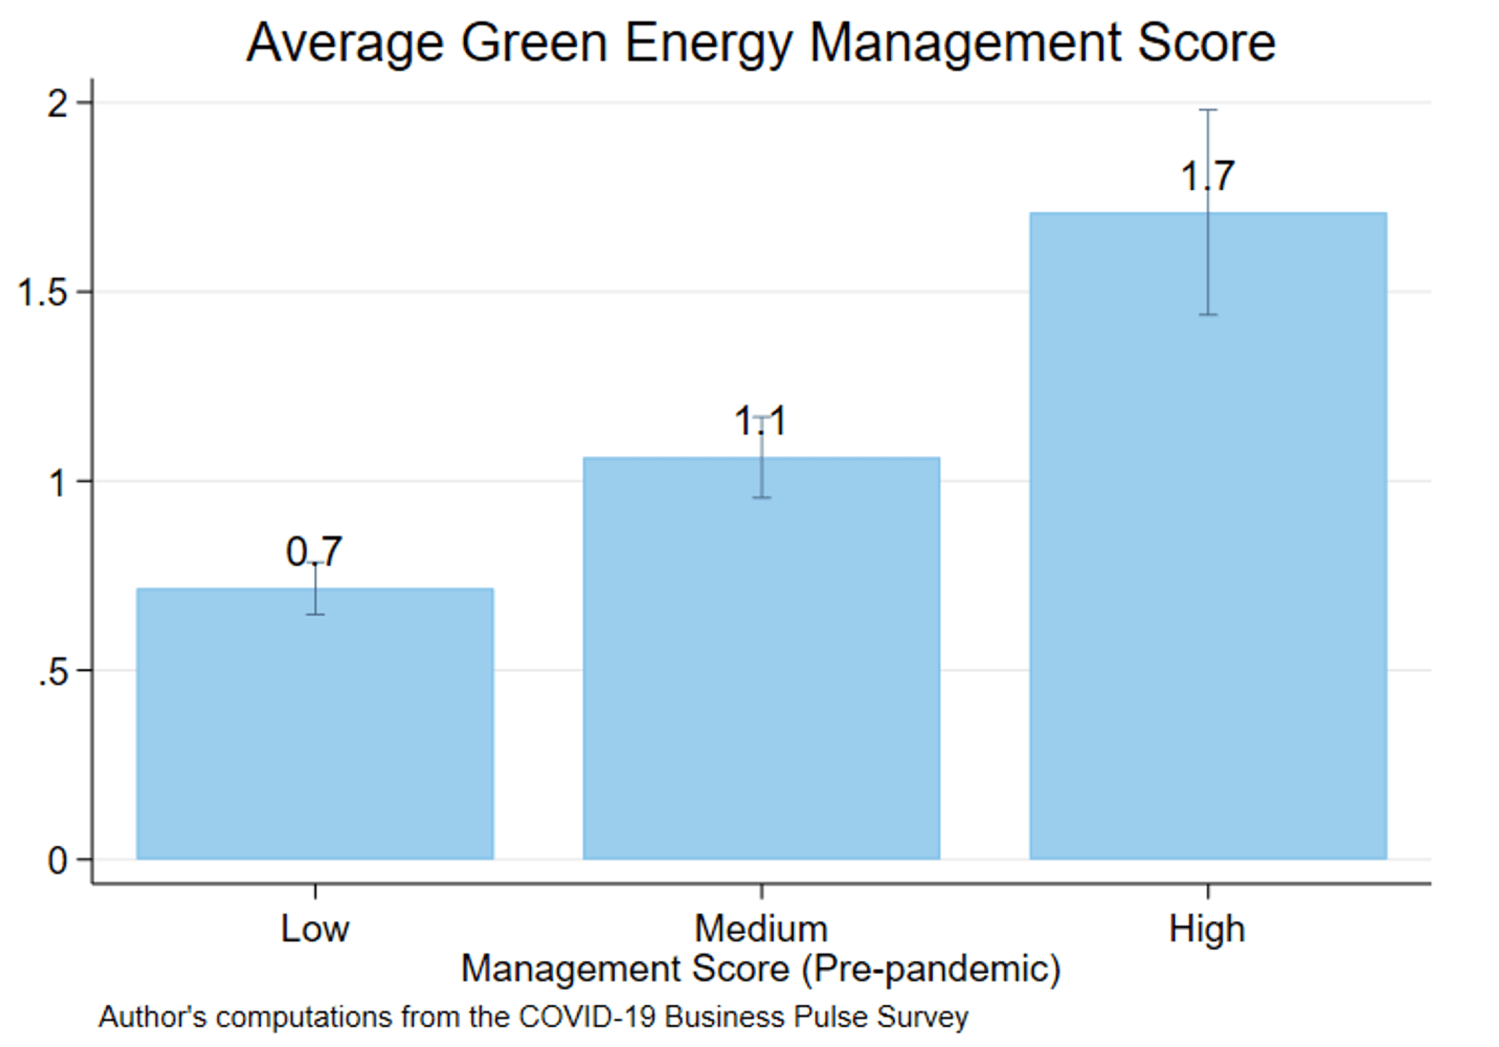 Figure 2. Higher managerial practices associated with higher green energy practices